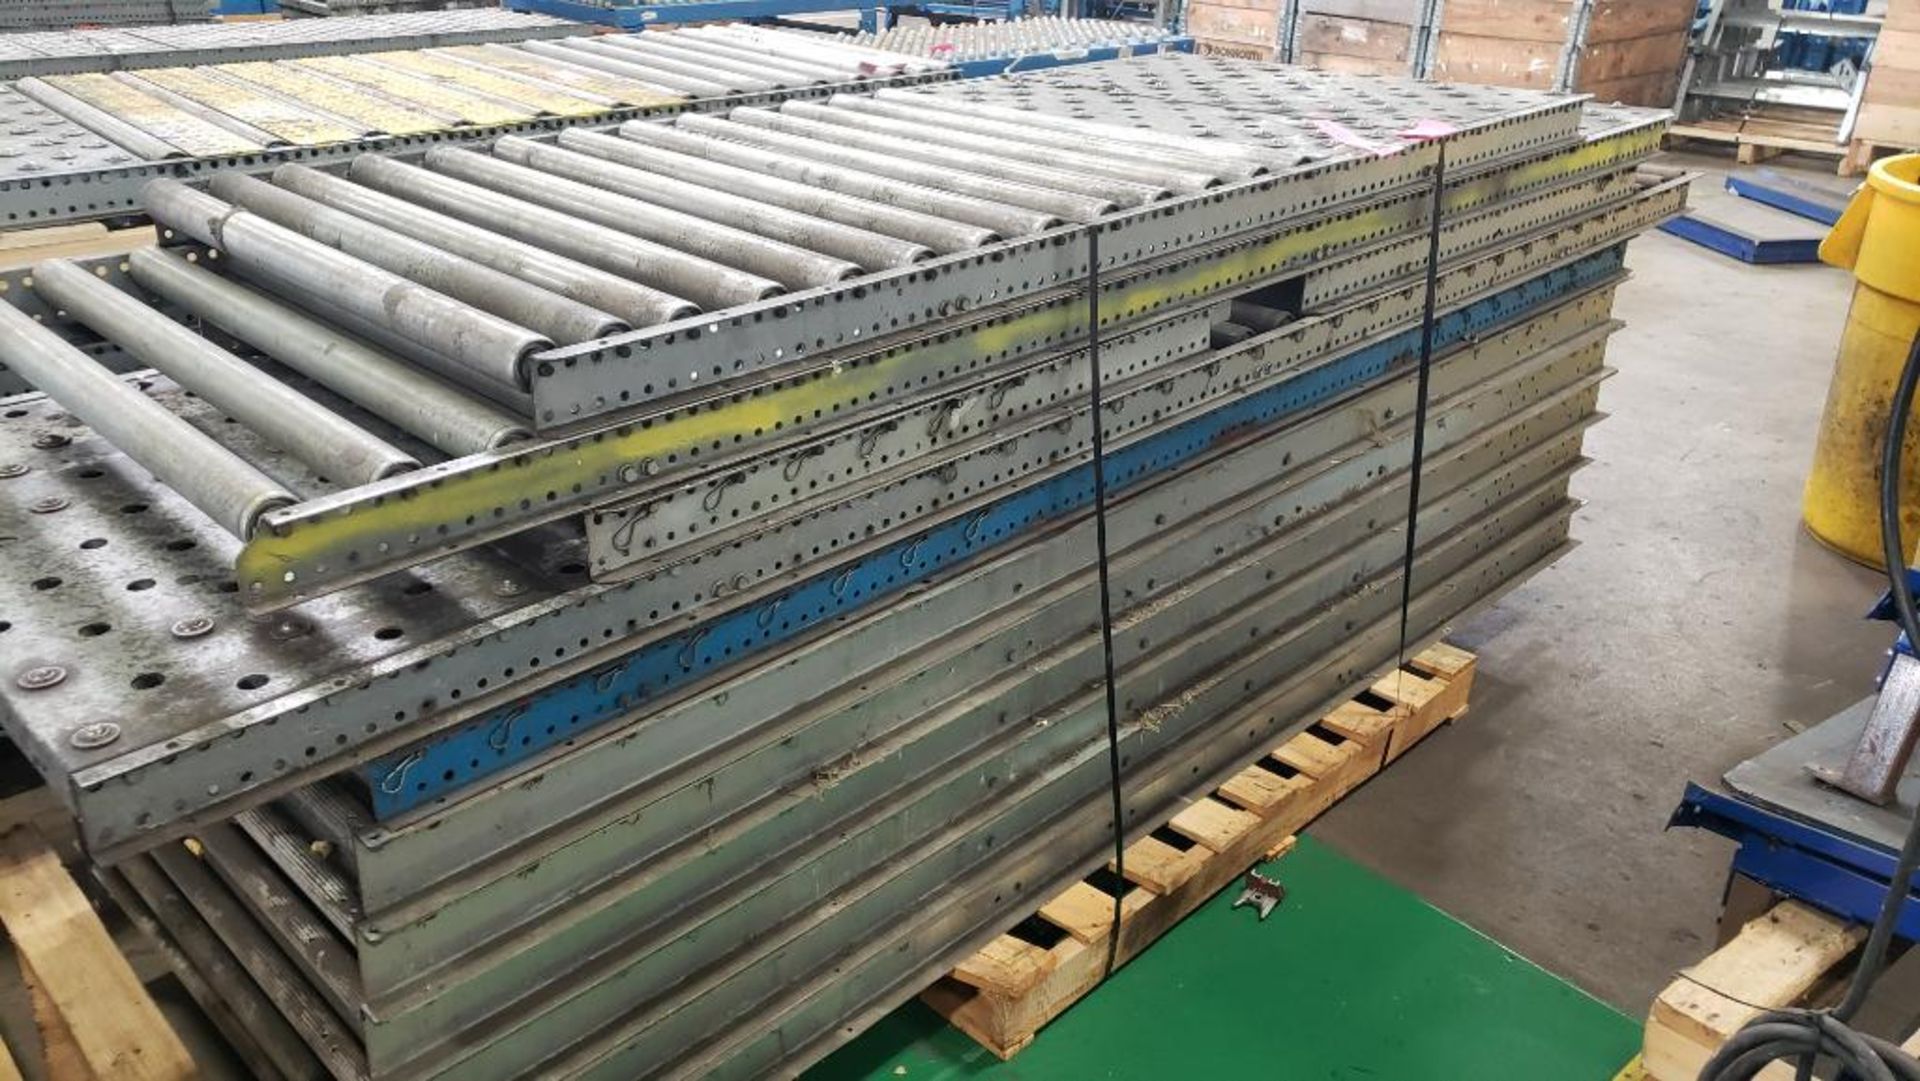 Qty 11 - Sections of roller conveyor. 34" W x 79" longest length.